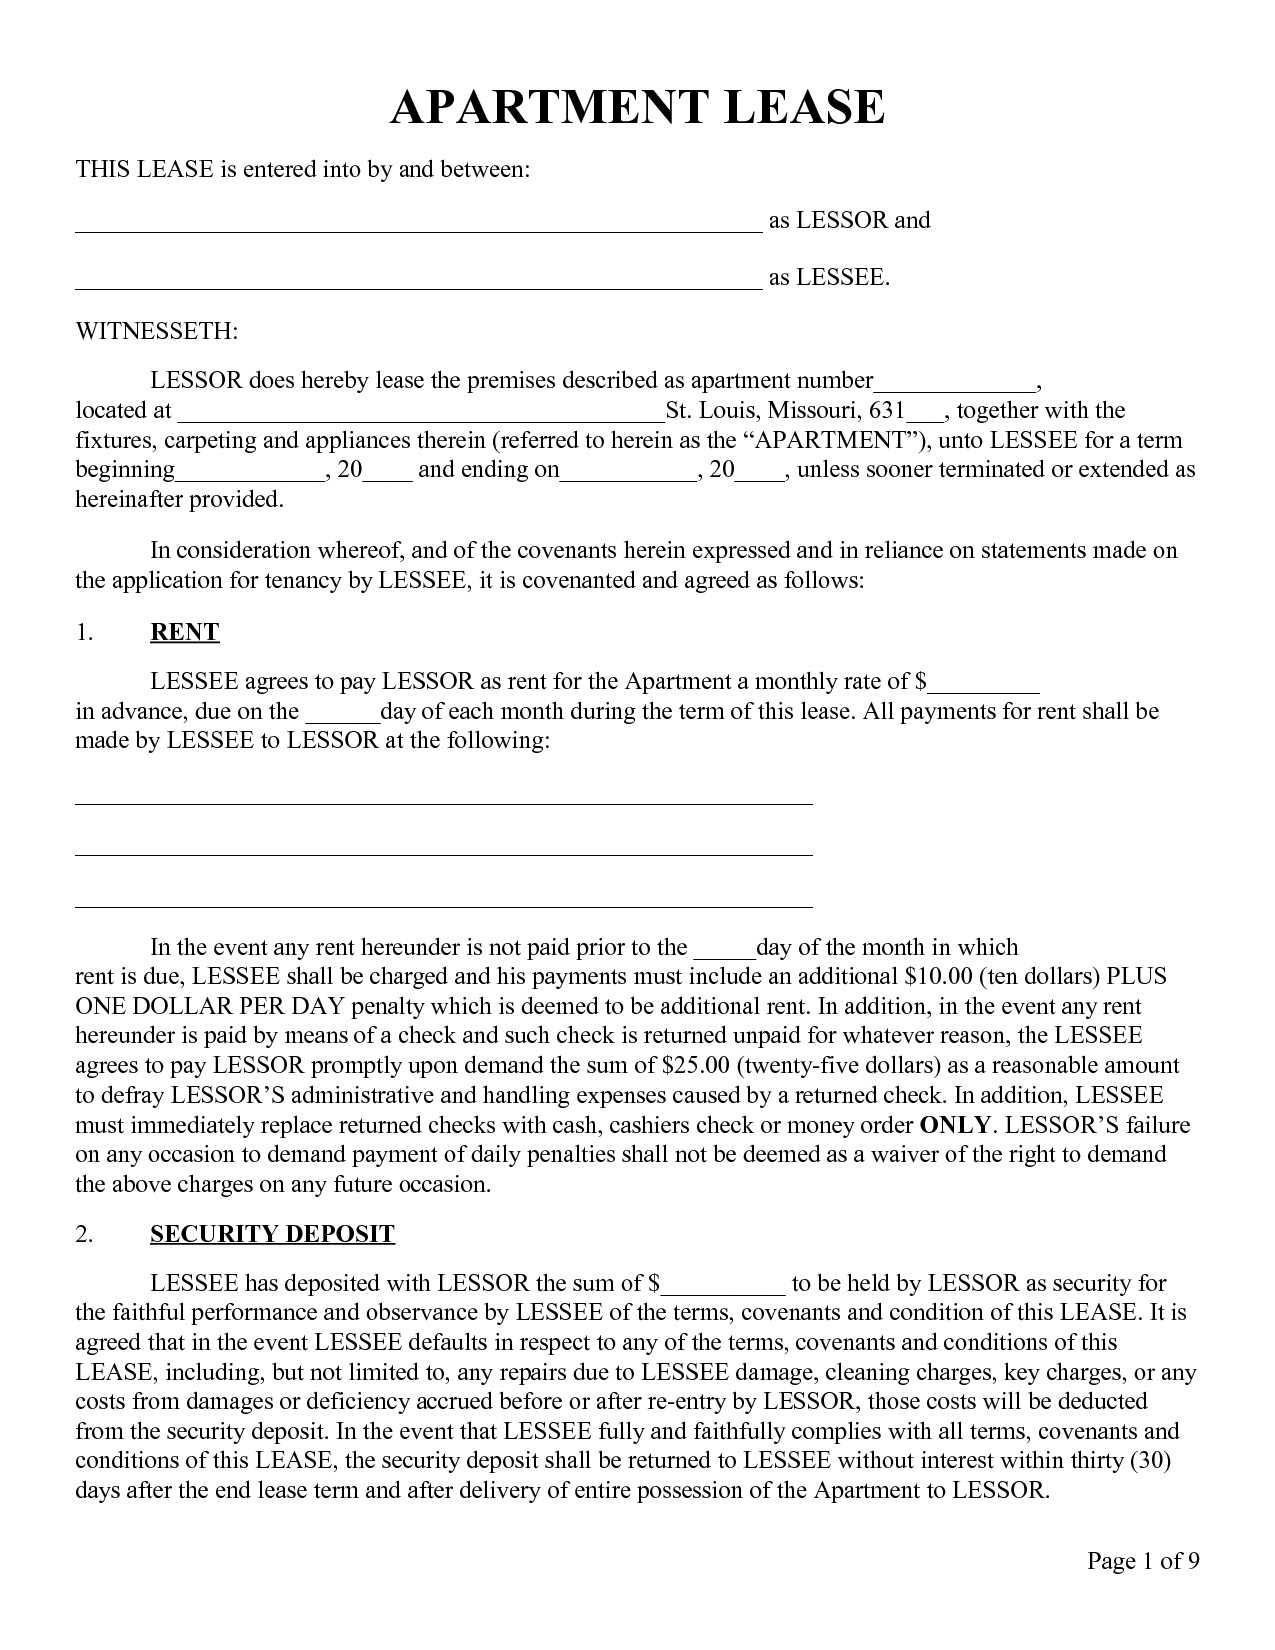 End Of Lease Letter Template - What Happens at the End A Car Lease Agreement Lovely E Page